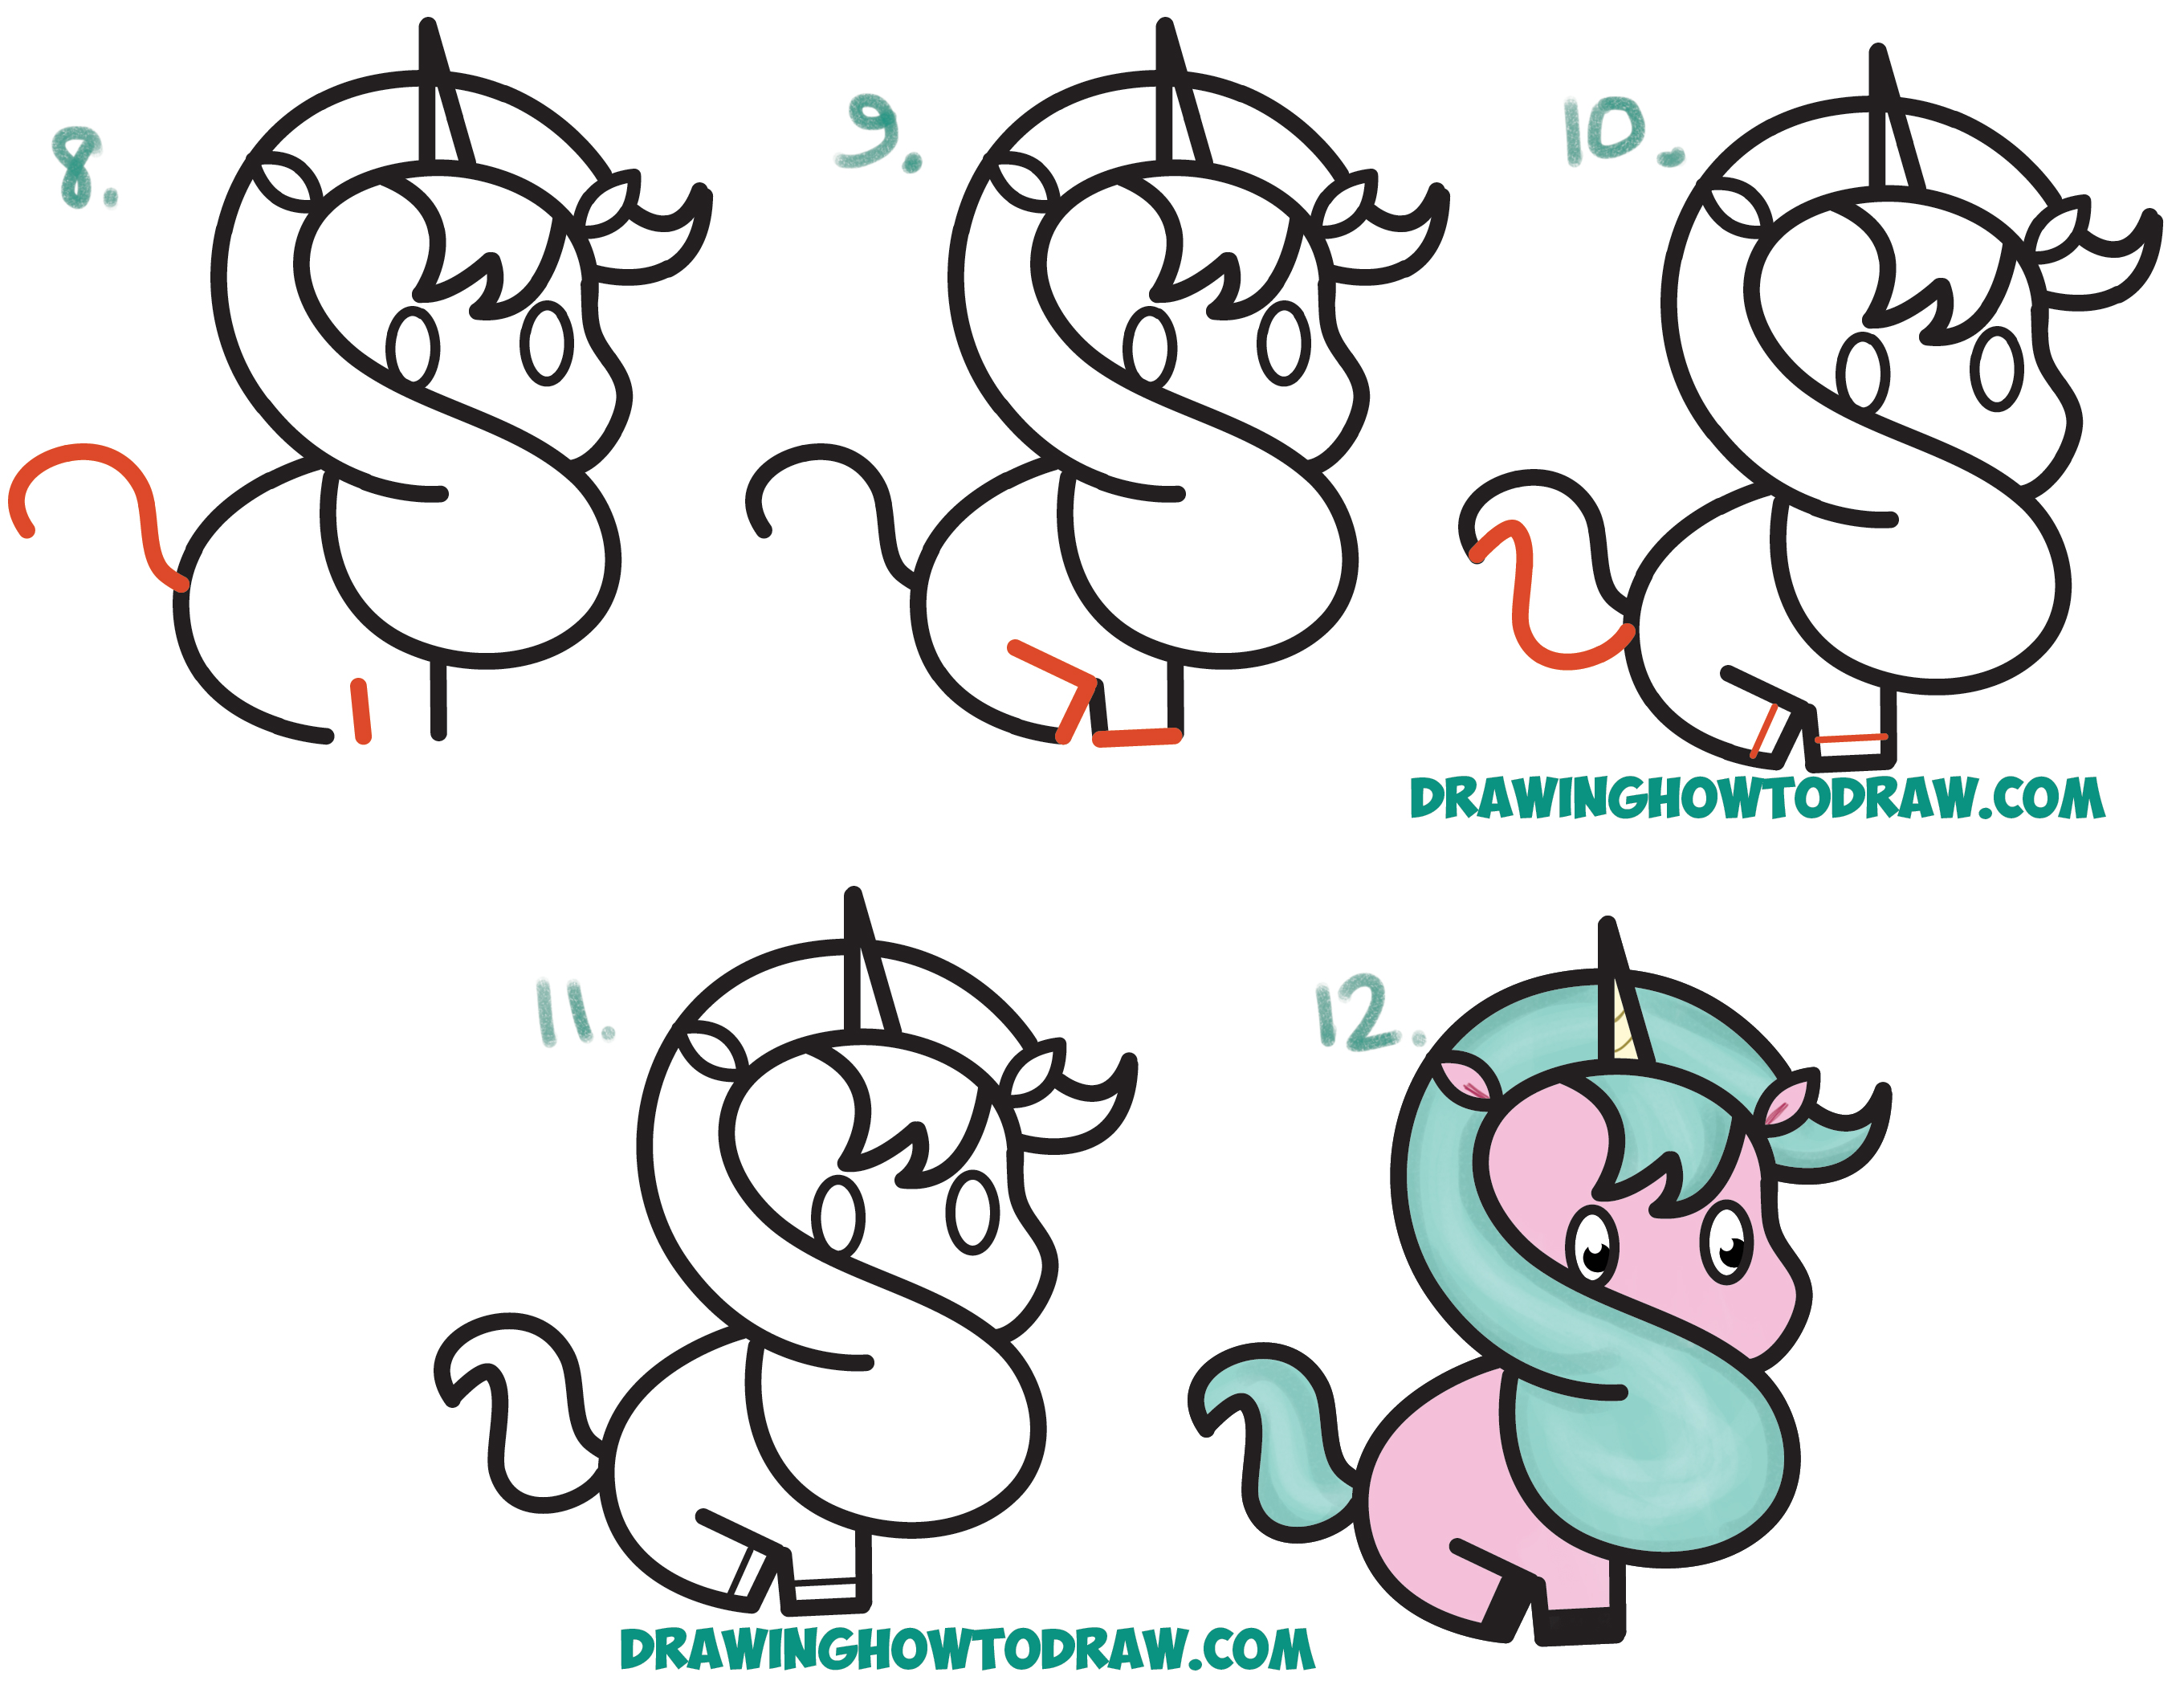 Learn How to Draw a Cute Cartoon Unicorn (Kawaii) from a Dollar Sign Simple Steps Drawing Lesson for Children and Beginners